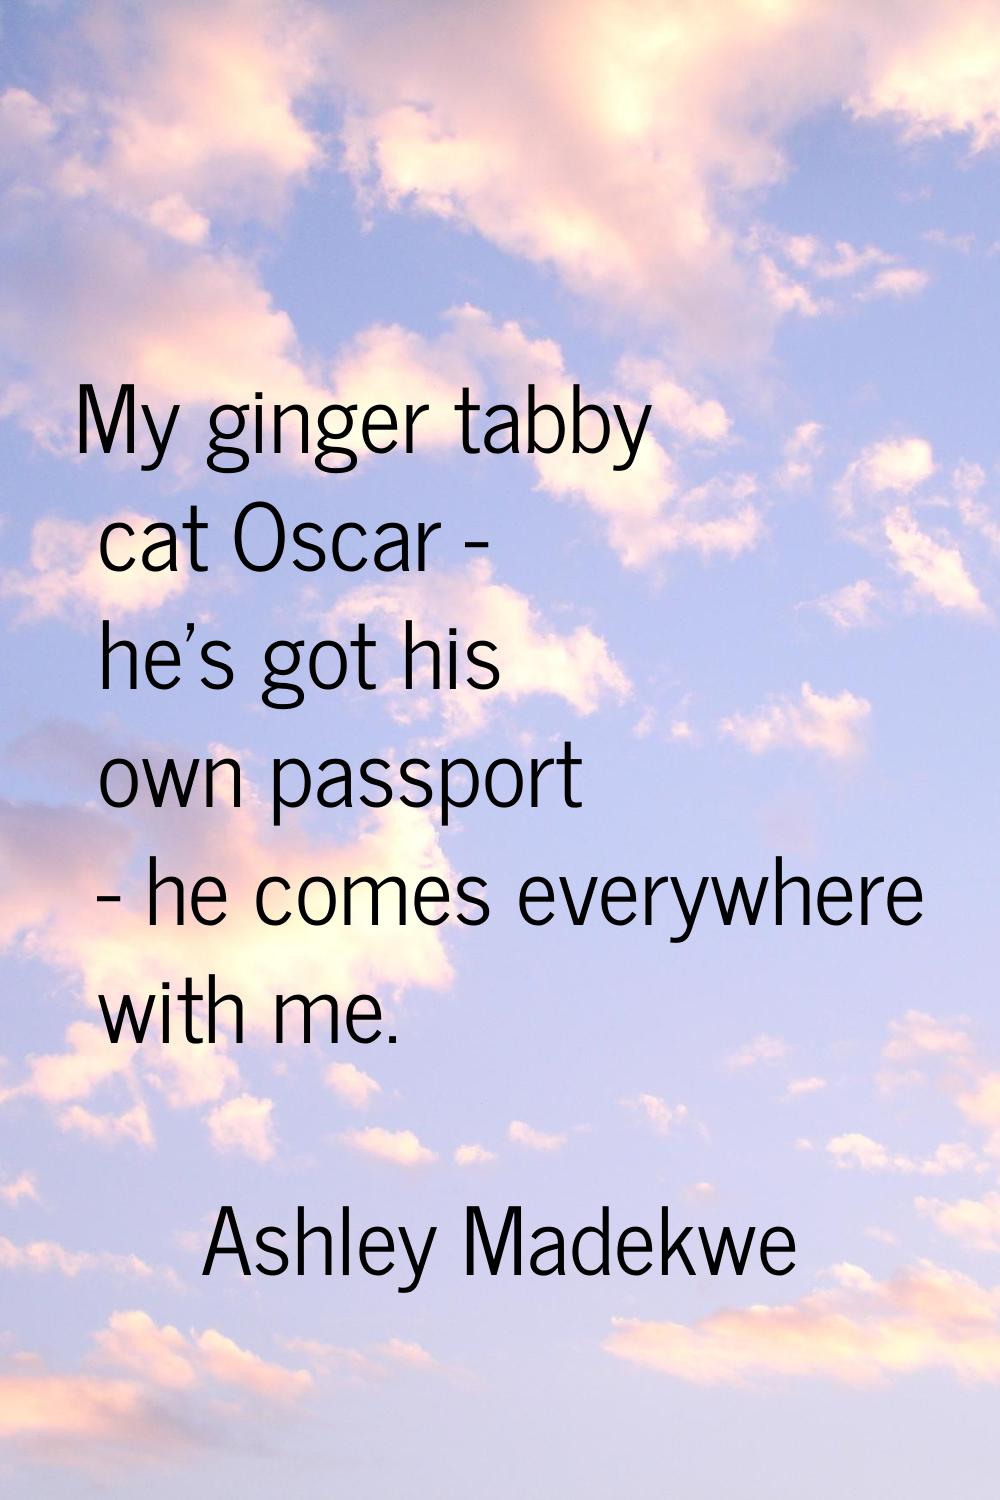 My ginger tabby cat Oscar - he's got his own passport - he comes everywhere with me.